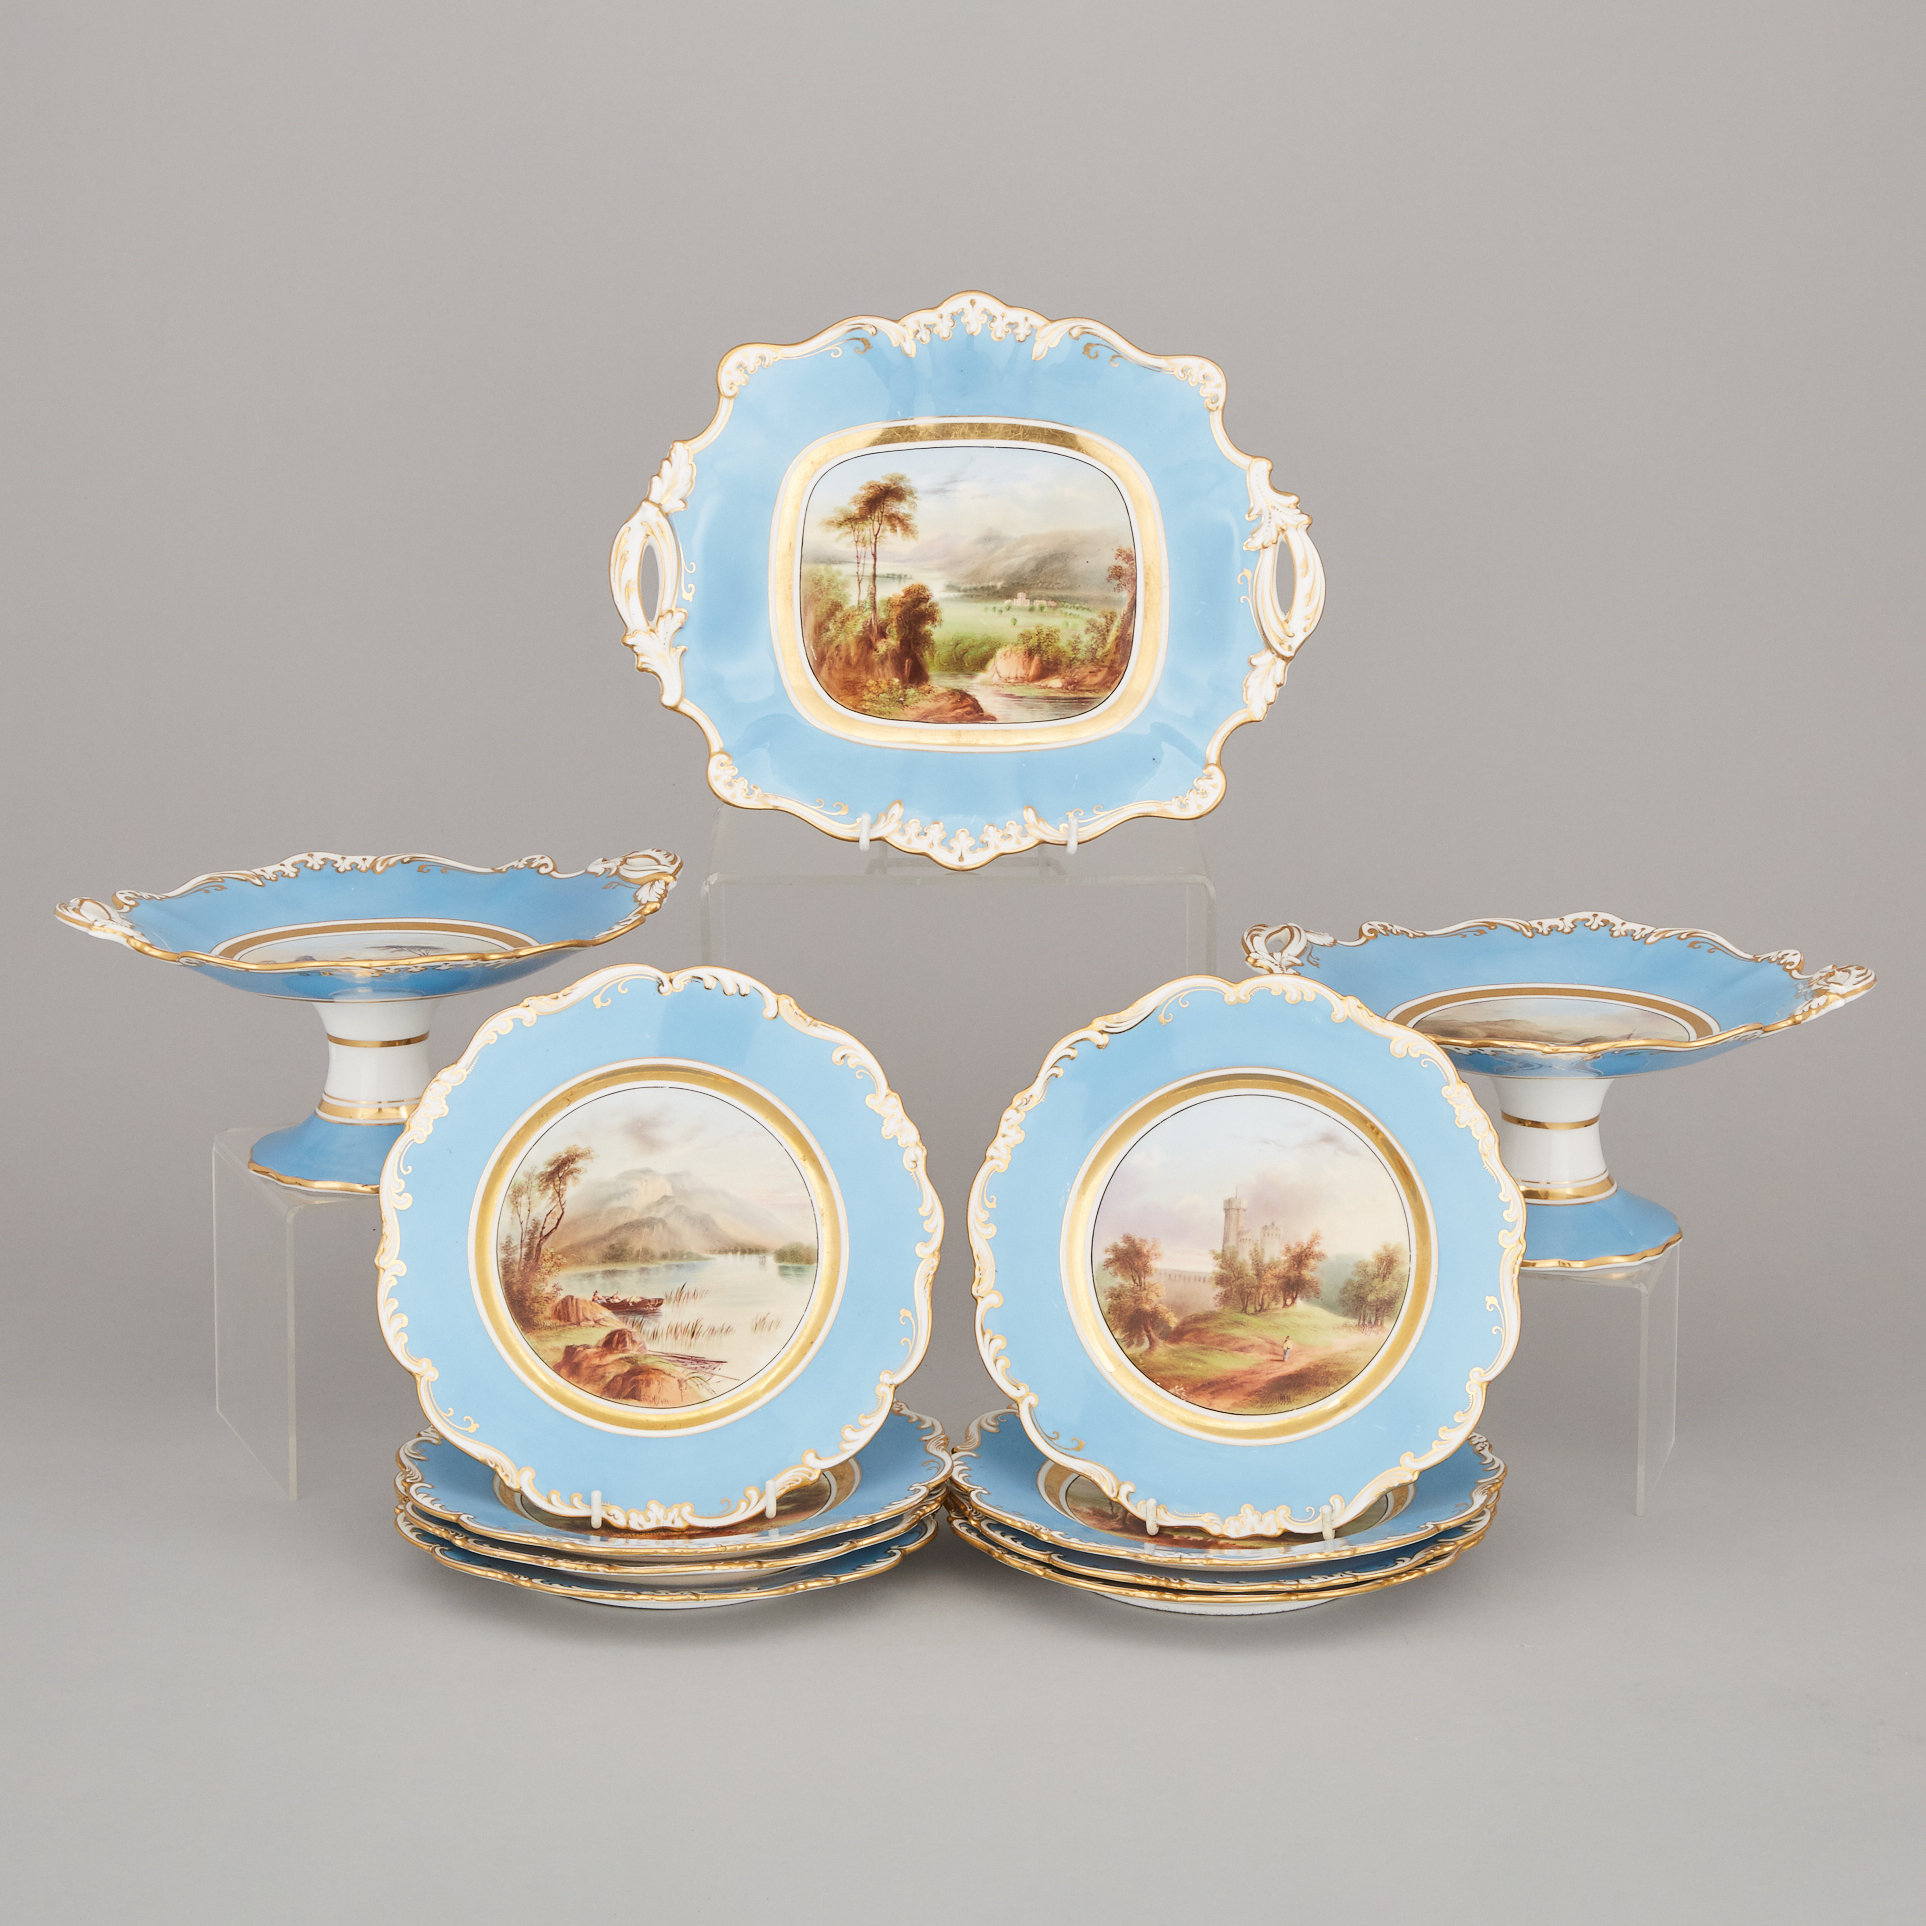 English Blue and Gilt Bordered Topographical Dessert Service, probably Ridgway, mid-19th century